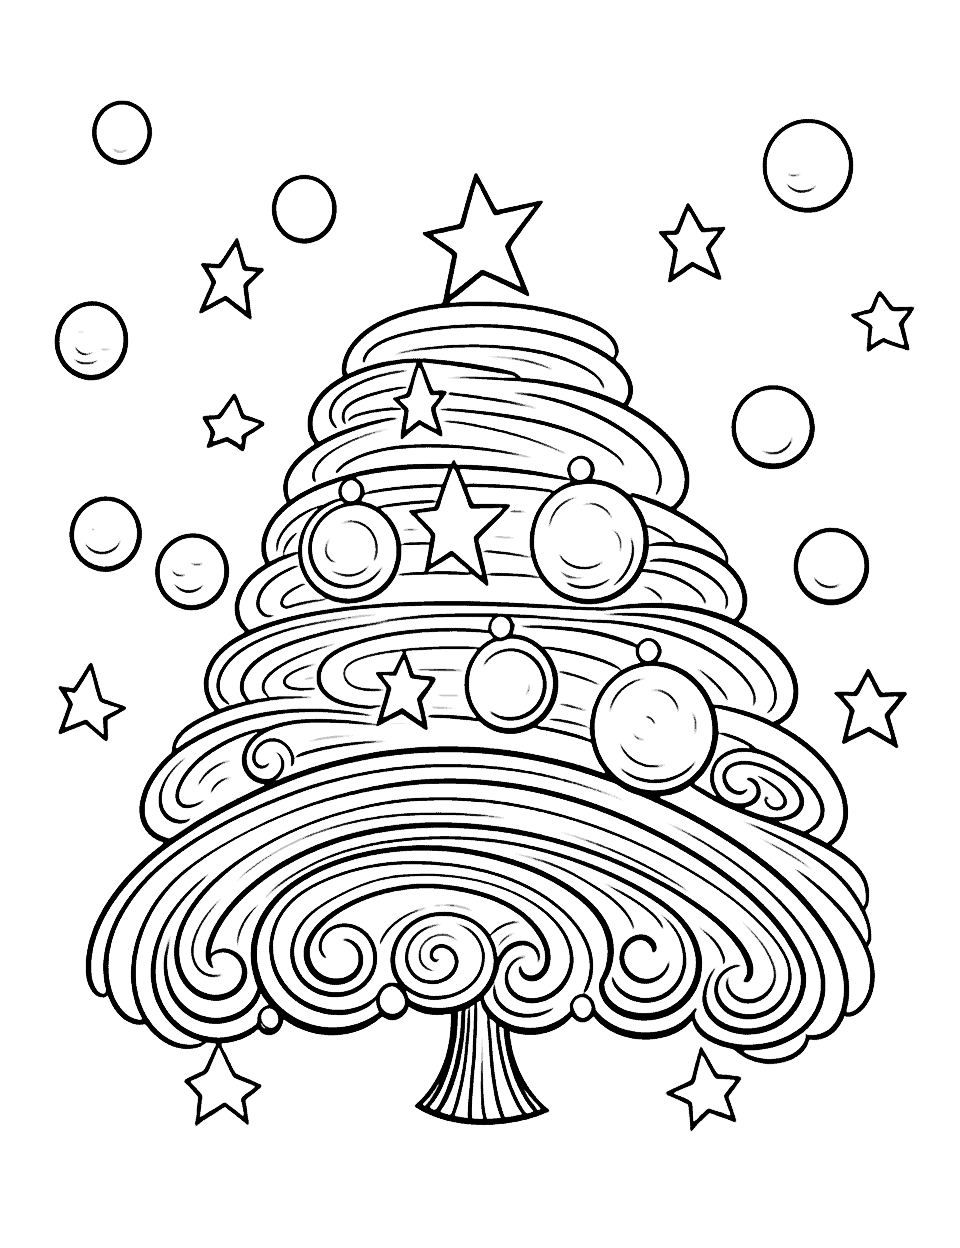 Rainbow Christmas Tree Coloring Page - A Christmas tree decorated with rainbow-colored ornaments.